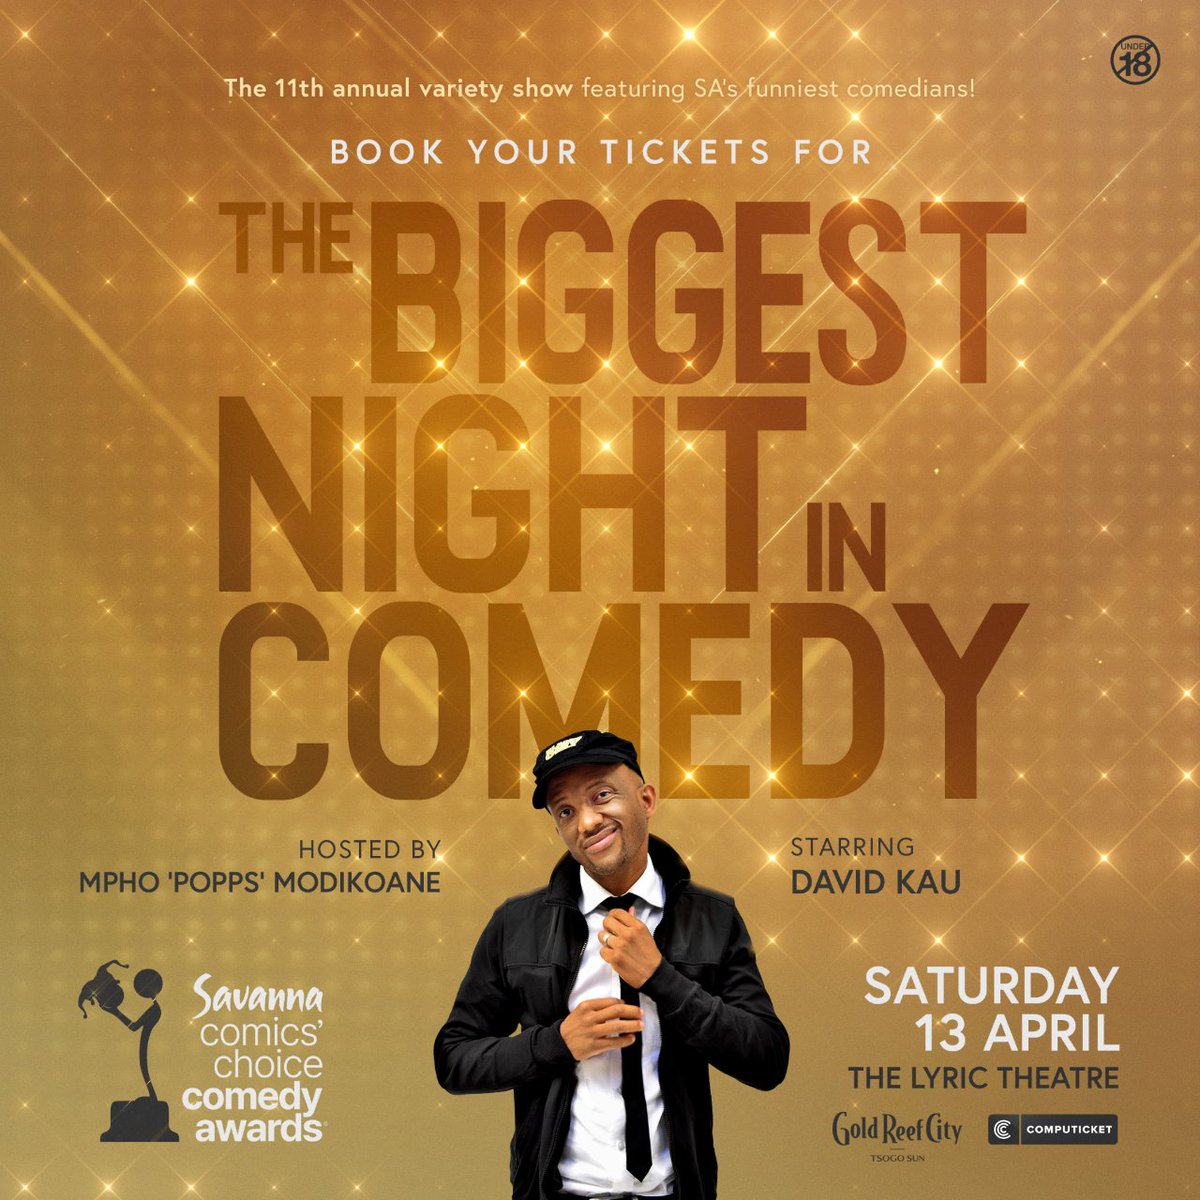 It's the BIGGEST night in comedy at the Savanna @ComicsChoice Awards this Saturday! Leading the pack is the ever so dapper @MphoPopps alongside some of South Africa's comedy icons @celestentuli @KhanyisaBunu @davidkau1 Book your tickets NOW! shorturl.at/bAI09 #SavannaCCA